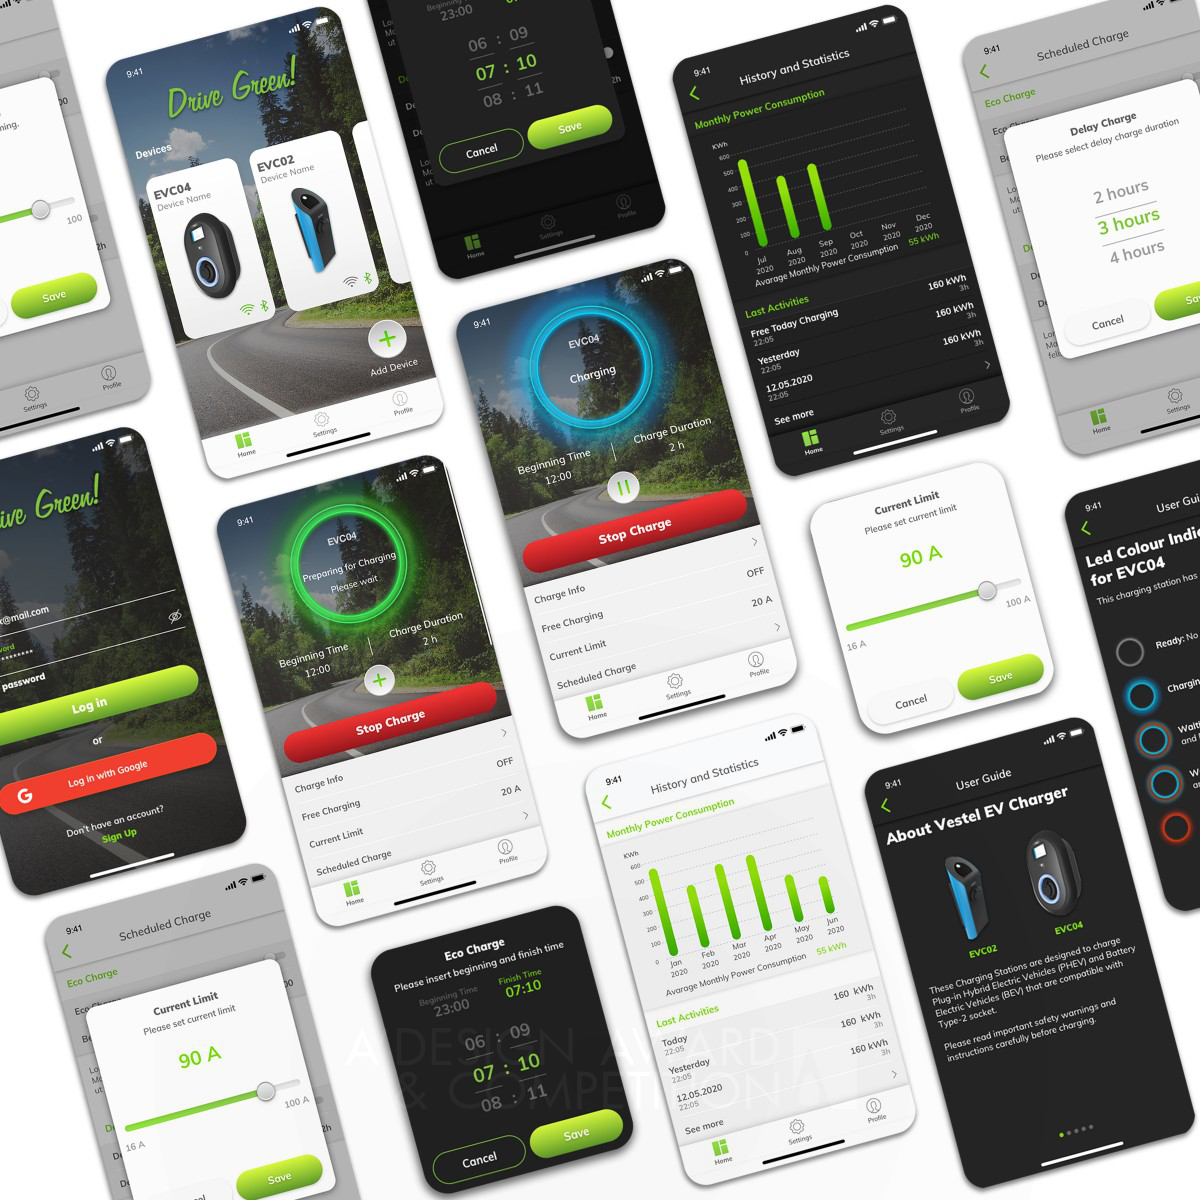 Vestel UX/UI Design Group wins Bronze at the prestigious A' Interface, Interaction and User Experience Design Award with Drive Green Electric Vehicle Charger App.